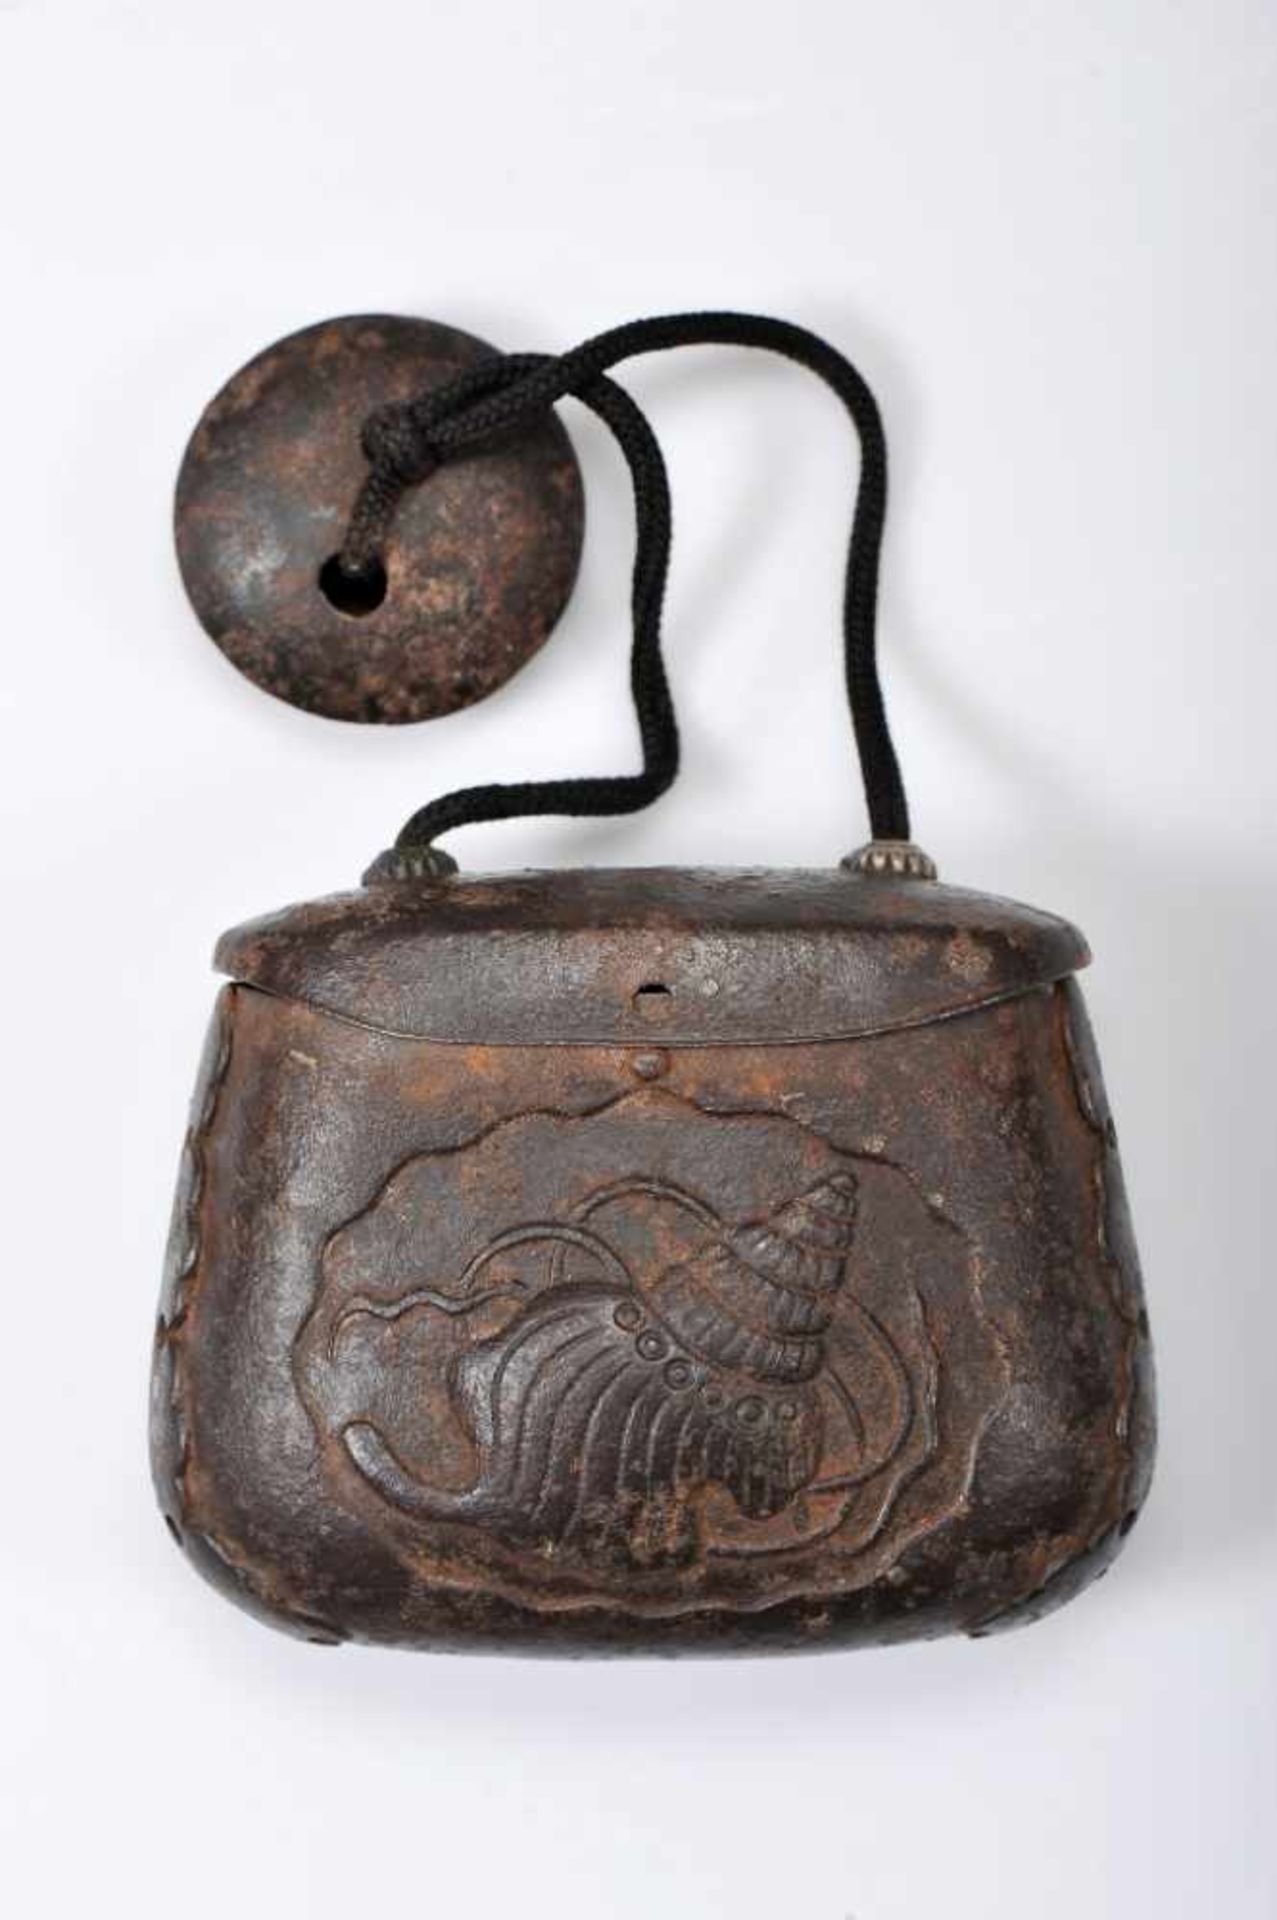 A «Tabako-Ire» - TOBACCO POUCHA «Tabako-Ire» - TOBACCO POUCH, iron worked in repoussé "Conch",